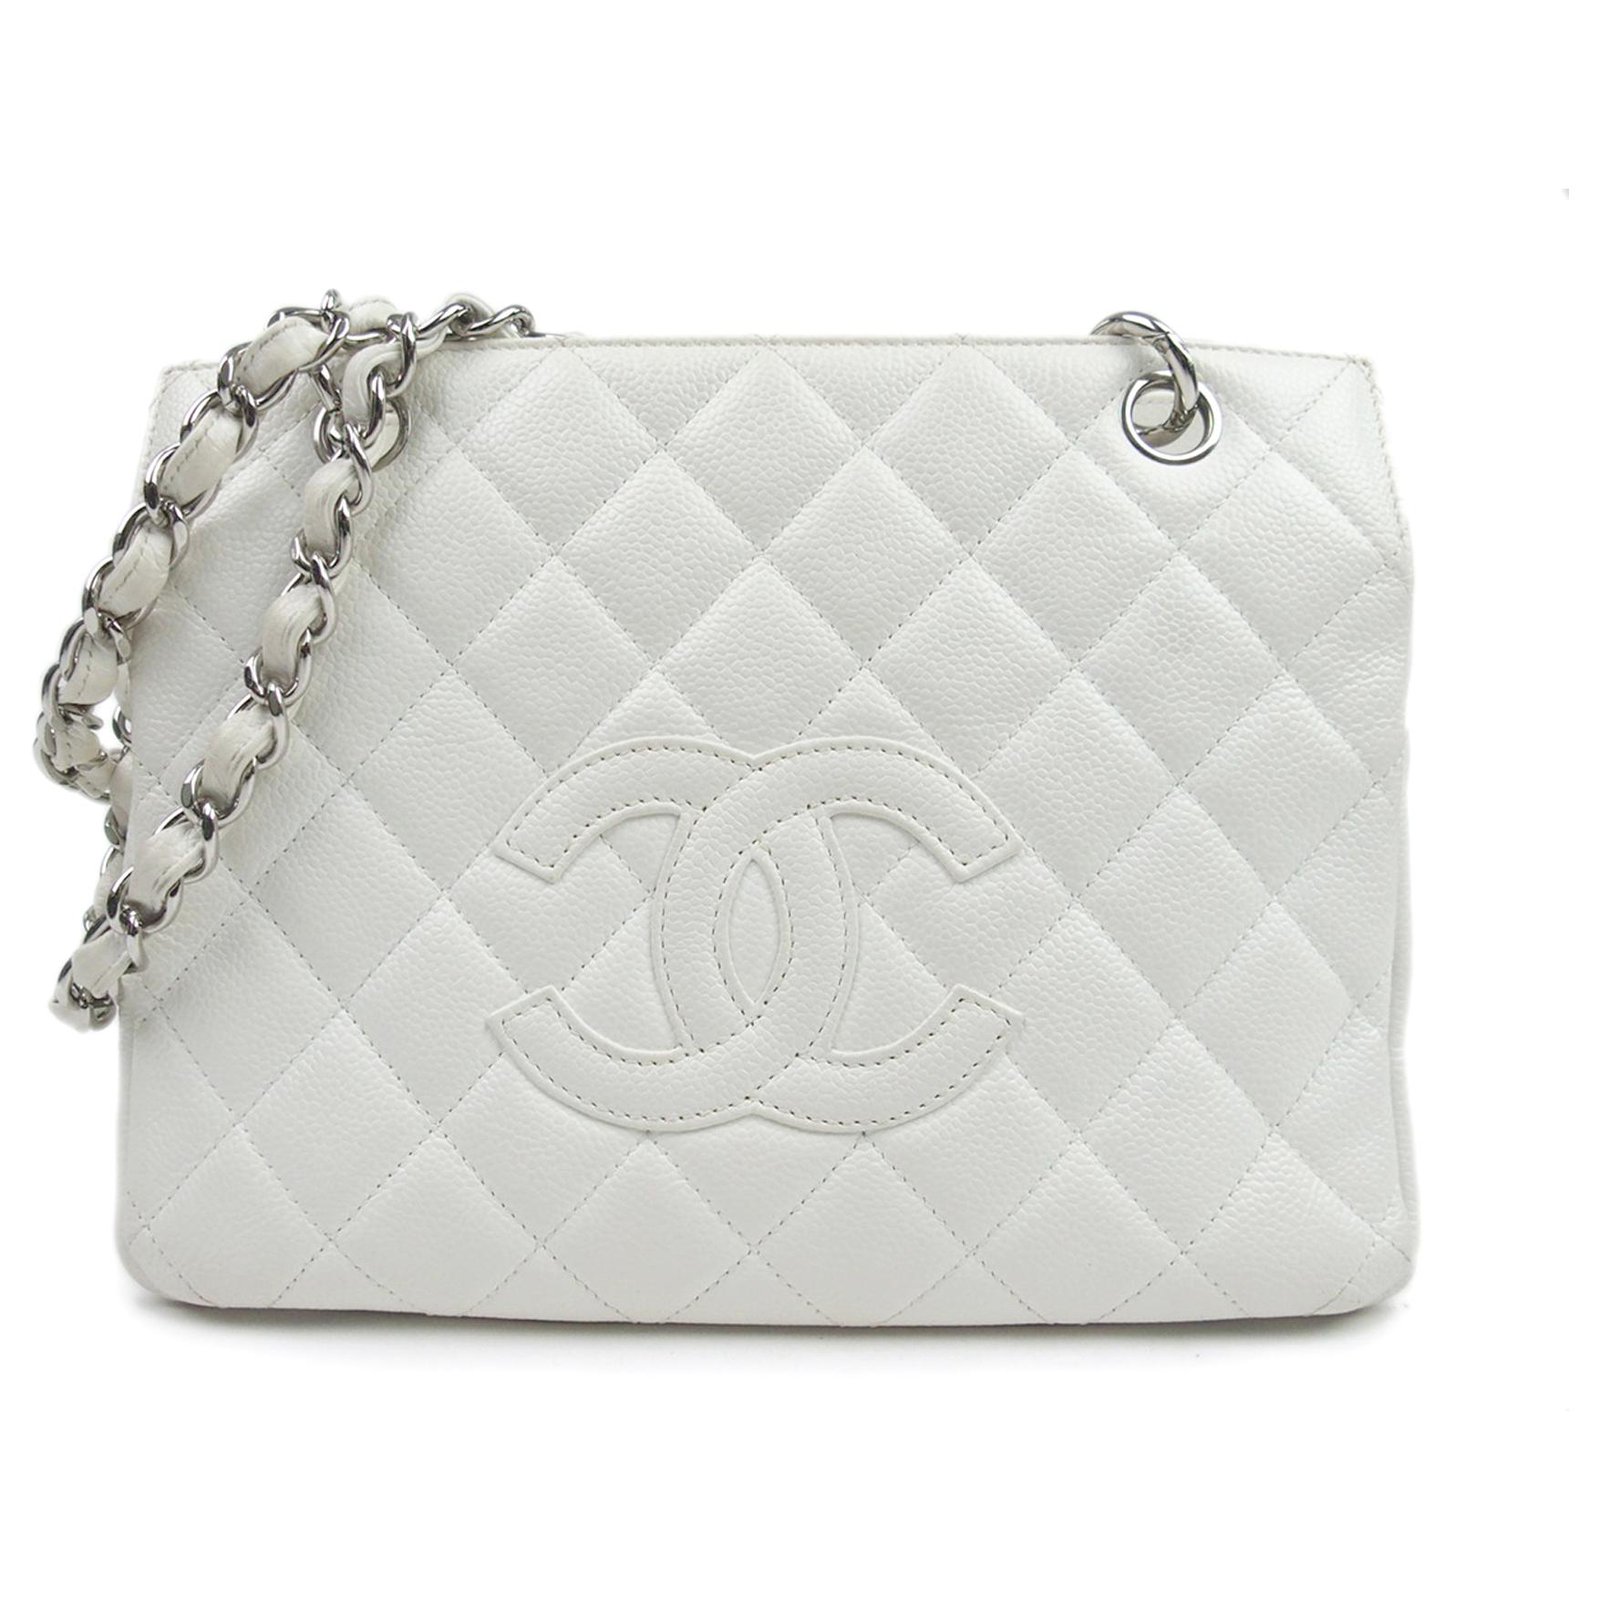 Skin - A46882 – dct - Calf - chanel pre owned 1995 cc button earrings item  - Tote - Large - White - ep_vintage luxury Store - Essential - Bag - CHANEL